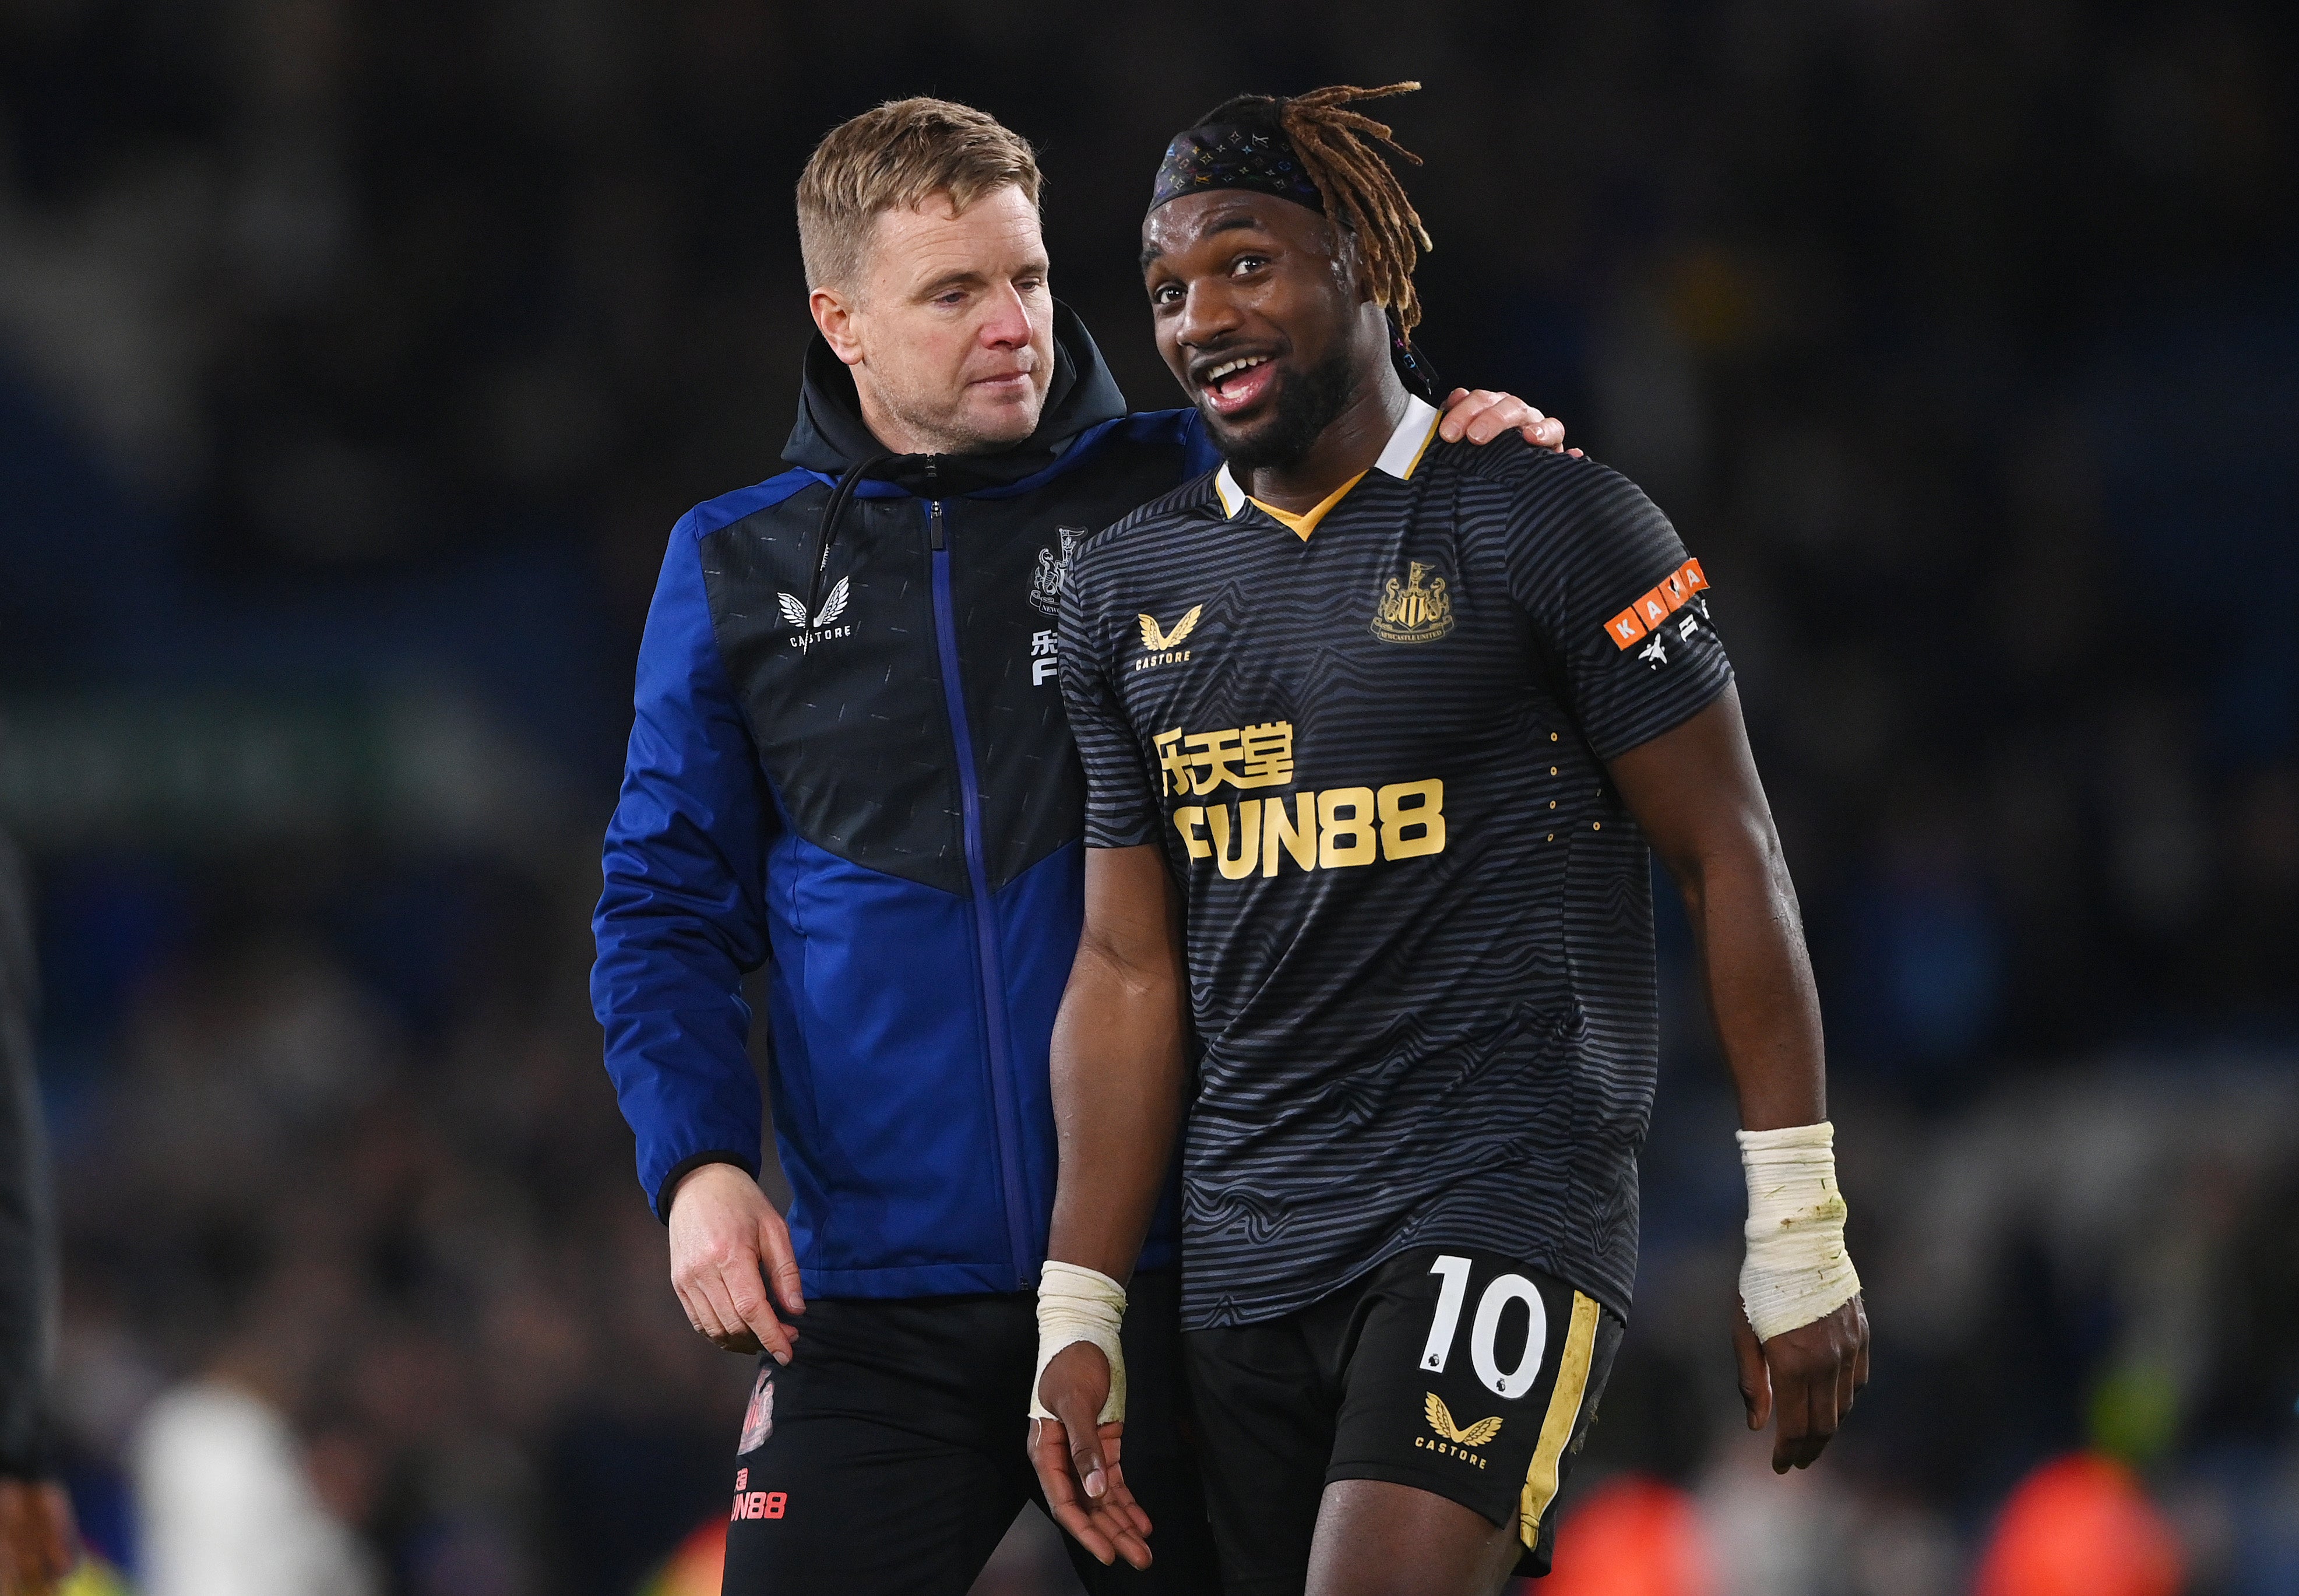 Under Eddie Howe’s management, Allan Saint-Maximin has been given free licence to just collect the ball and run